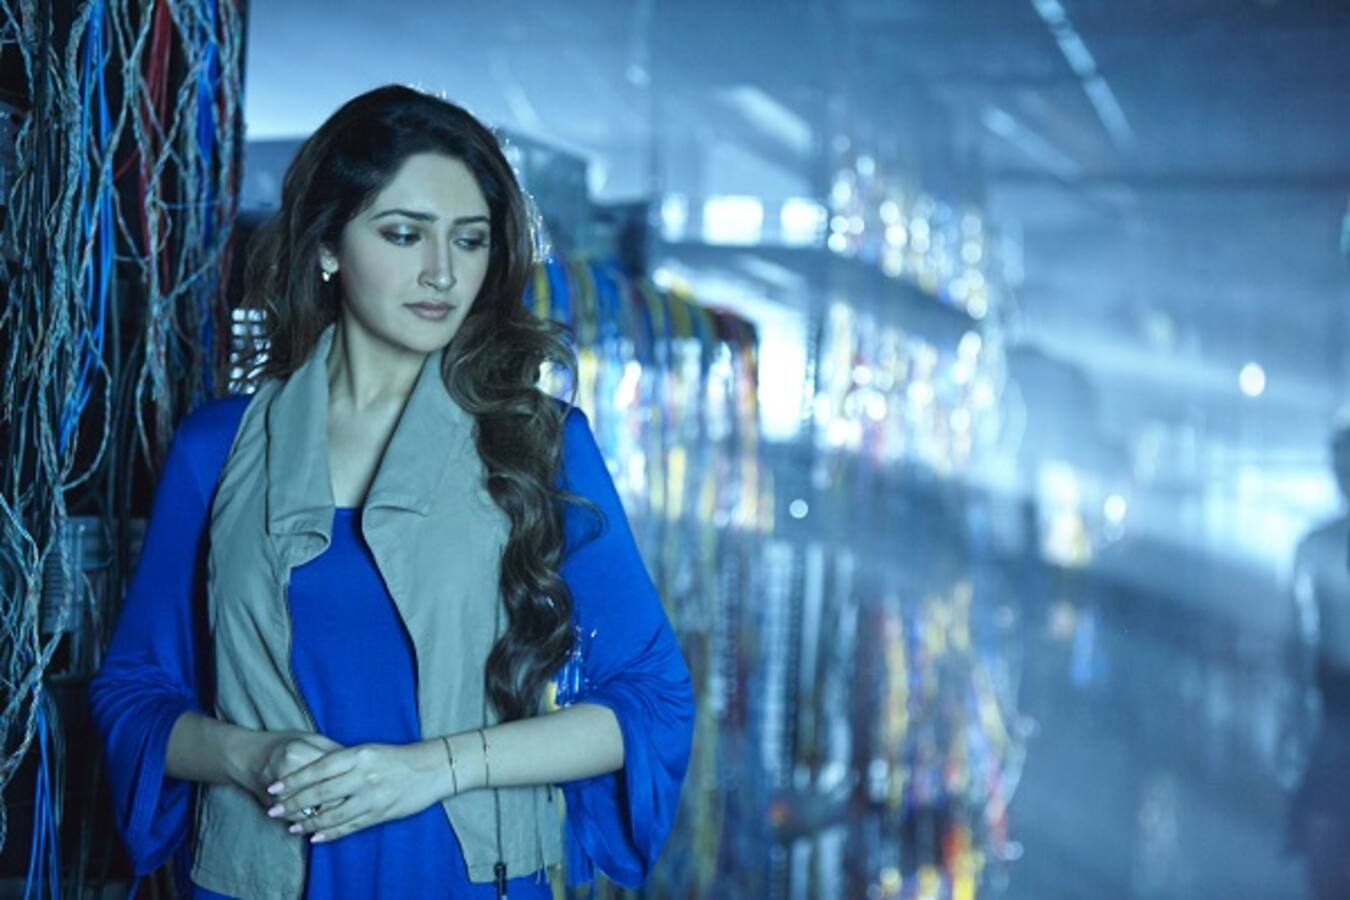 Sayyeshaa: Shivaay was a very big learning experience for me